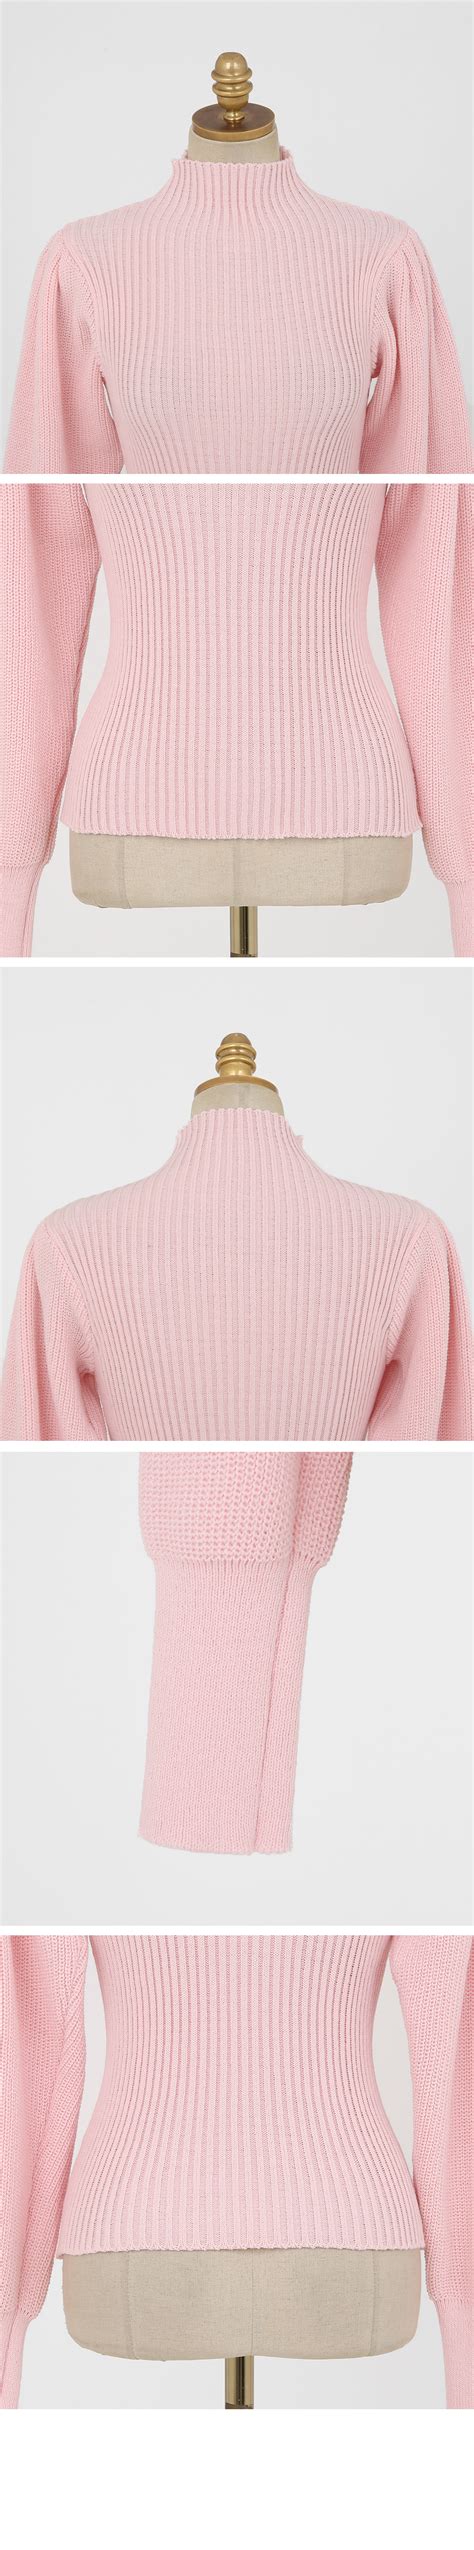 Gigot Sleeve High Neck Knit Top Dabagirl Your Style Maker Korean Fashions Clothes Bags